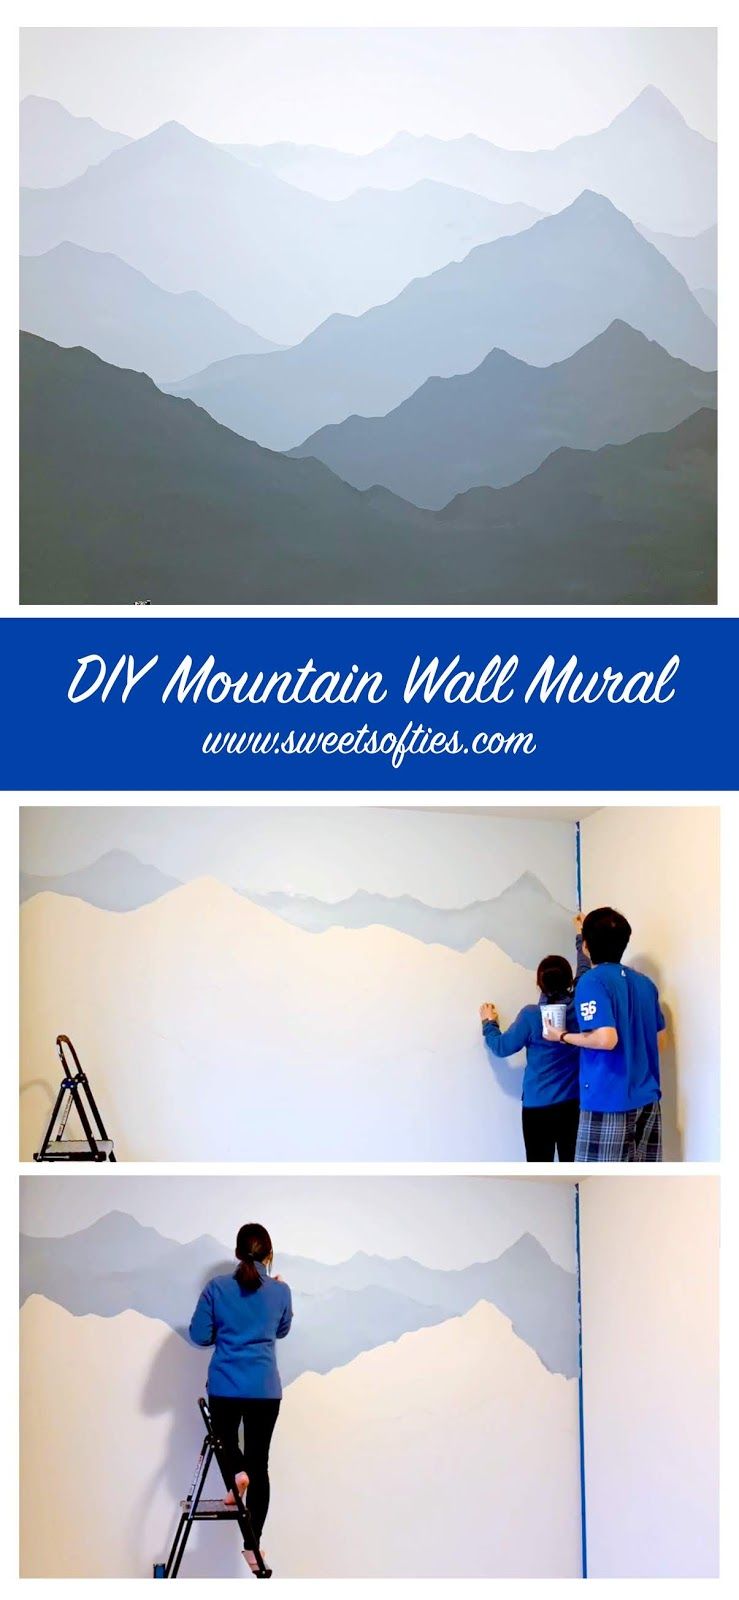 Sweet Softies | Amigurumi and Crochet: How to Paint a Mountain Mural on your Bedroom or Nursery Wall | DIY Timelapse + Speed Painting